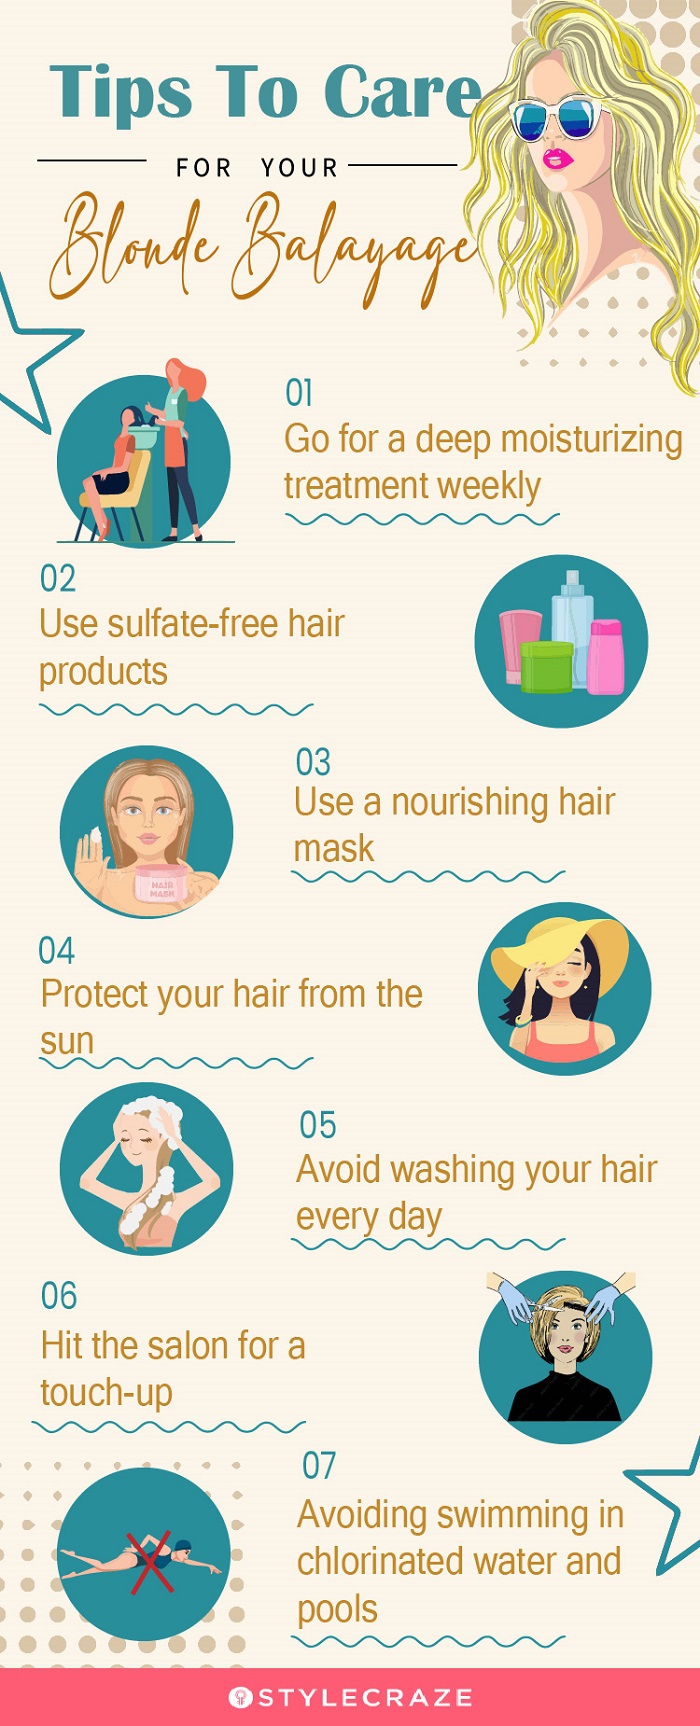 tips to care for your blonde balayage [infographic]